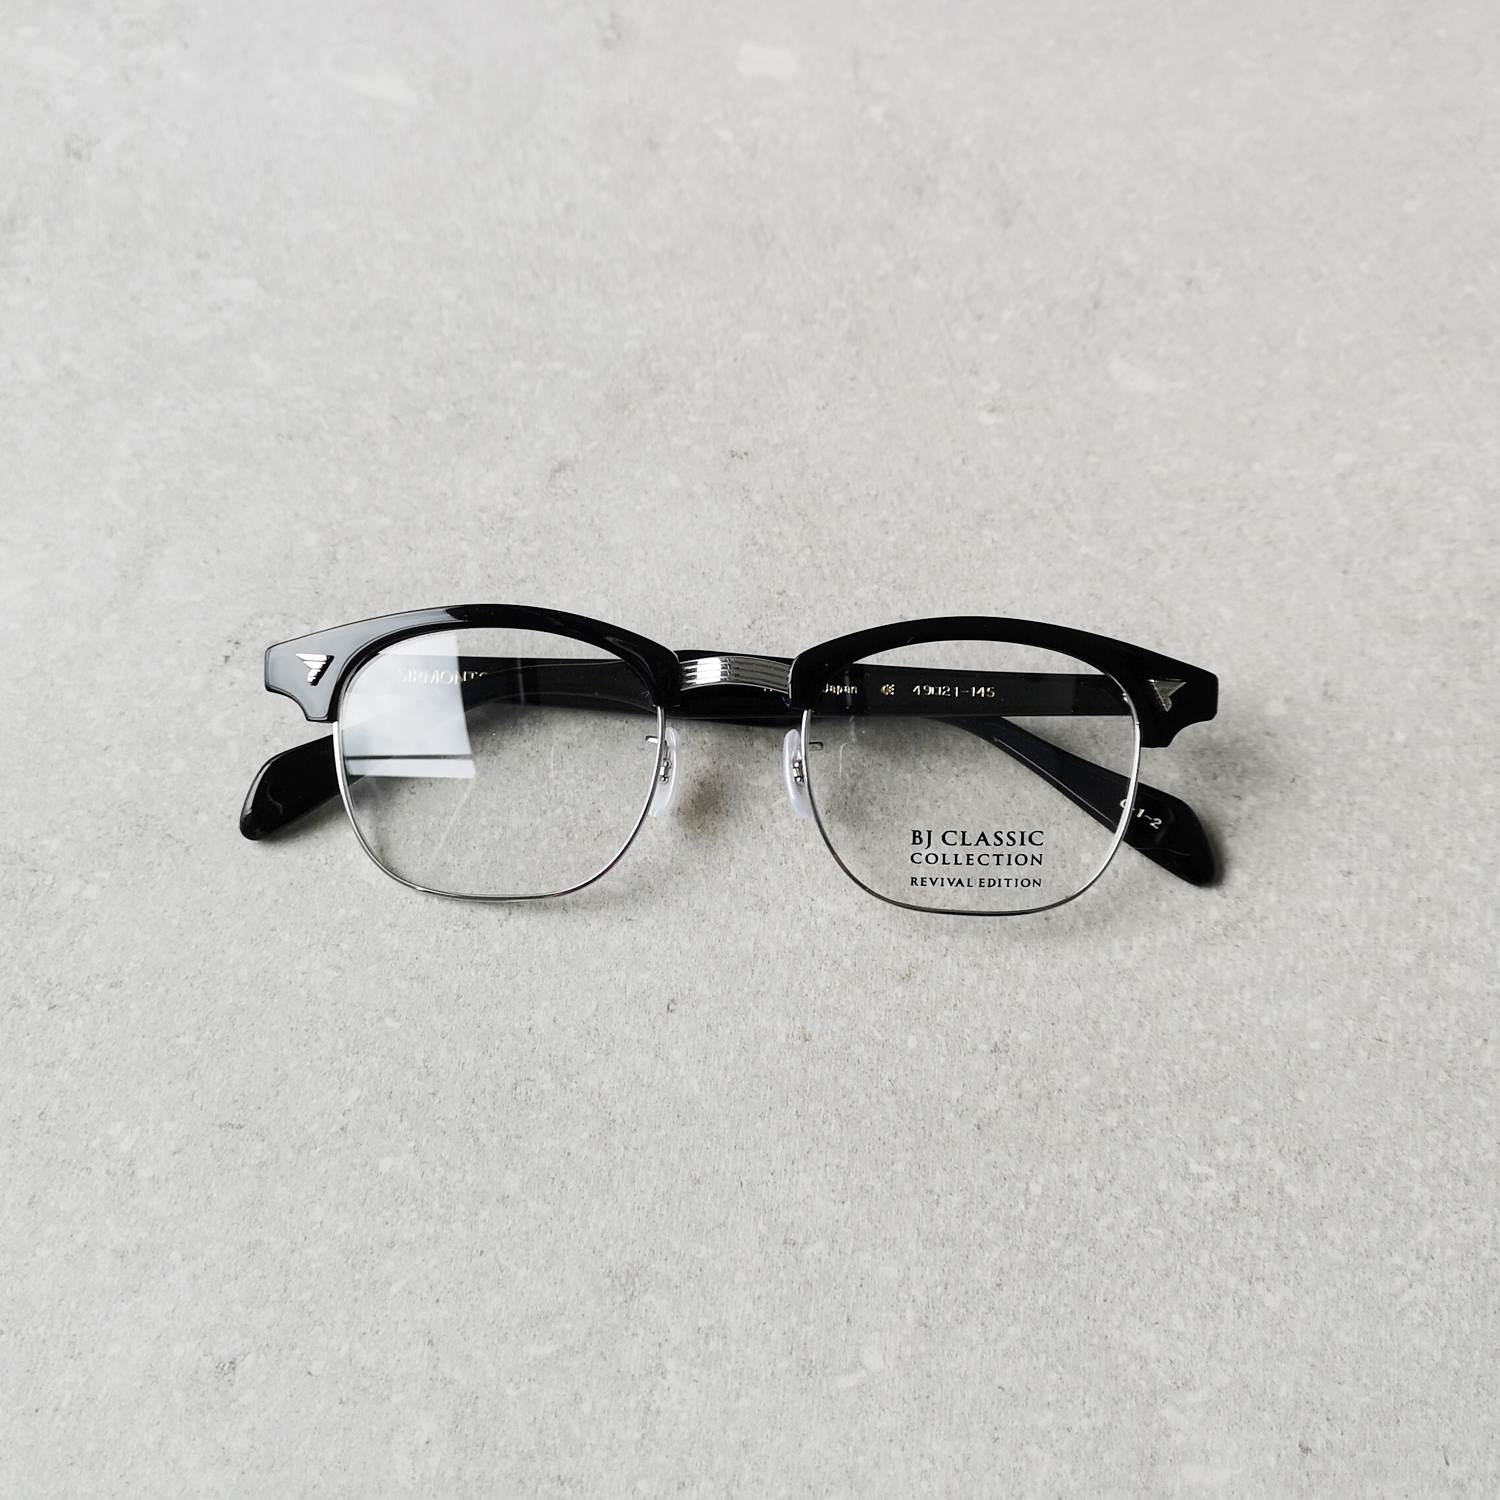 Revival Edition「SIRMONT®」 | BJ CLASSIC COLLECTION by BROS JAPAN ...